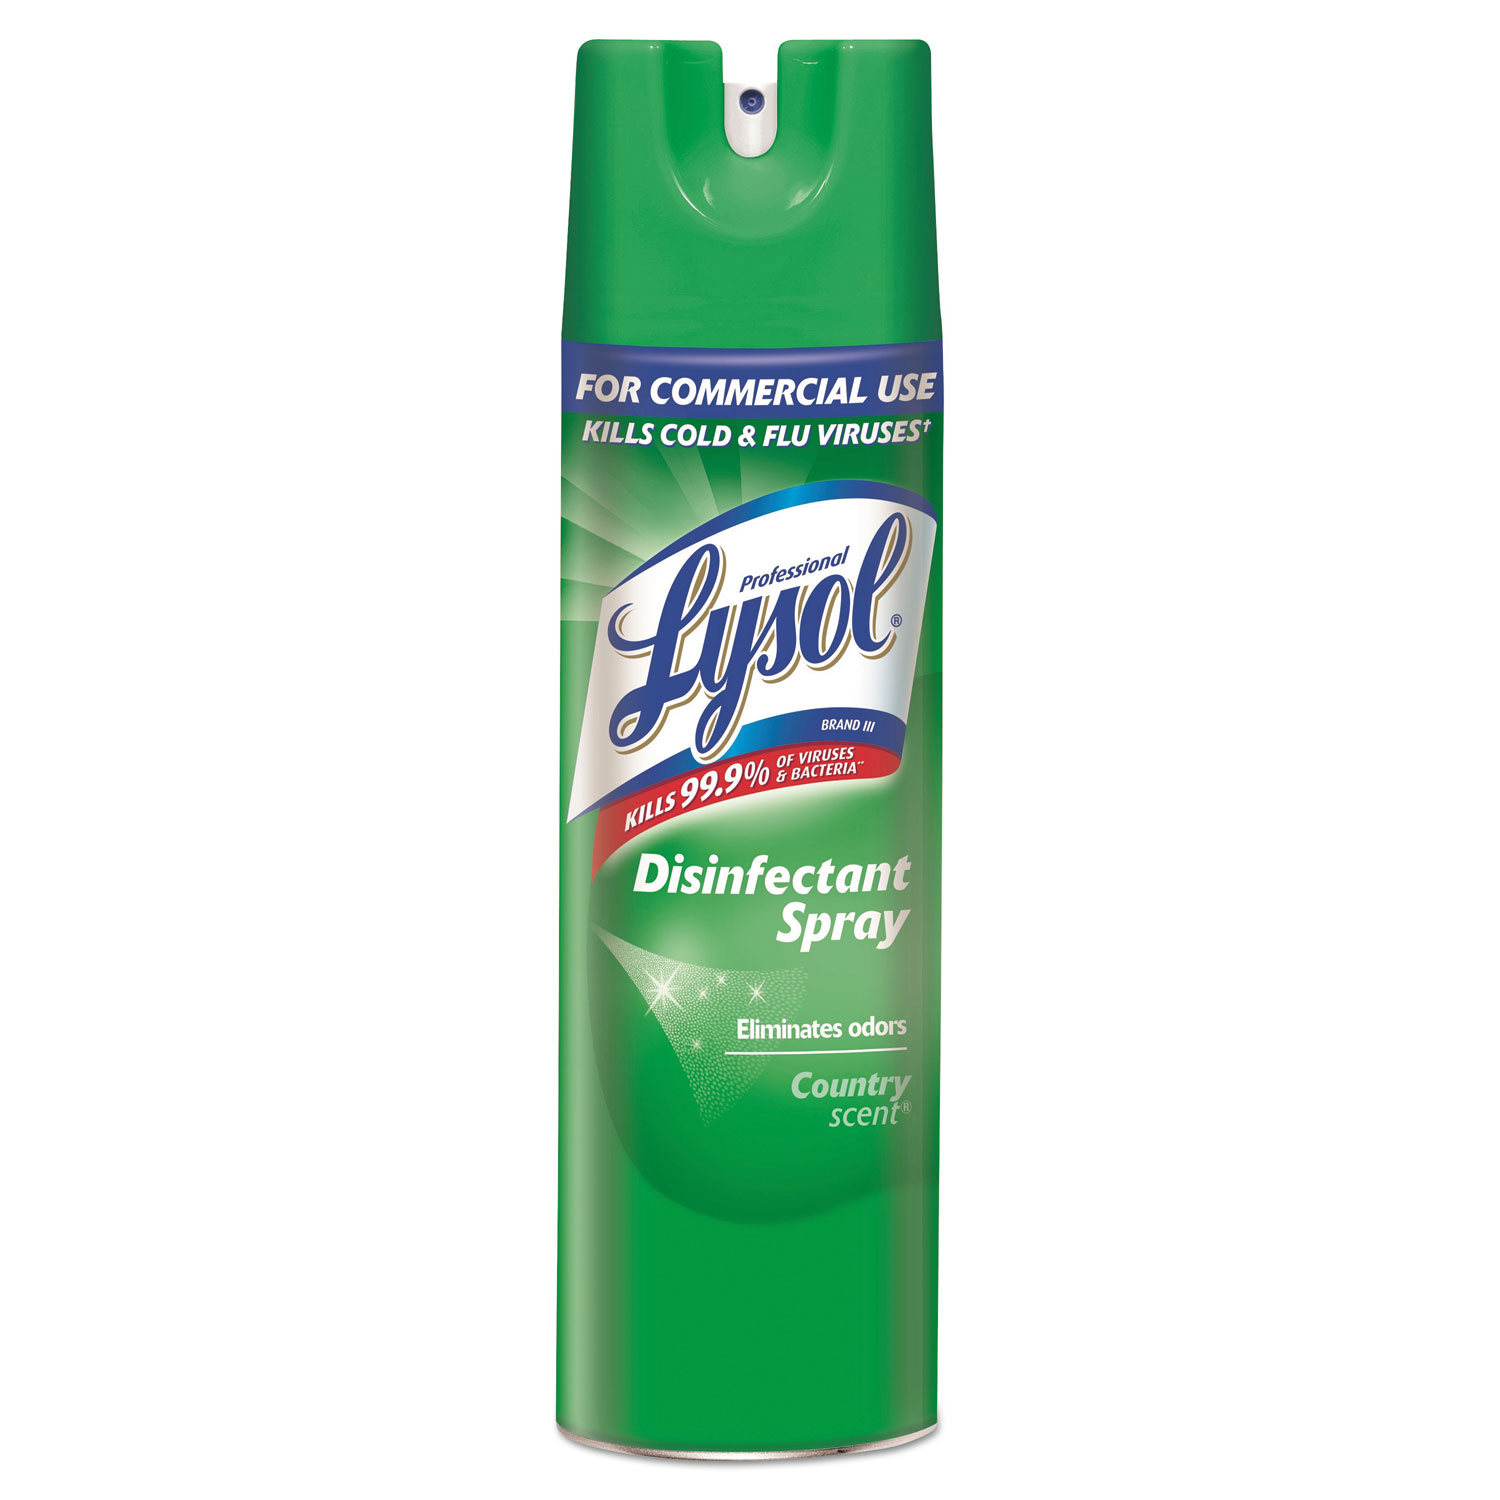  Professional LYSOL Brand 36241-74276 Disinfectant Spray, Country Scent, 19 oz Aerosol, 12 Cans/Carton (RAC74276CT) 